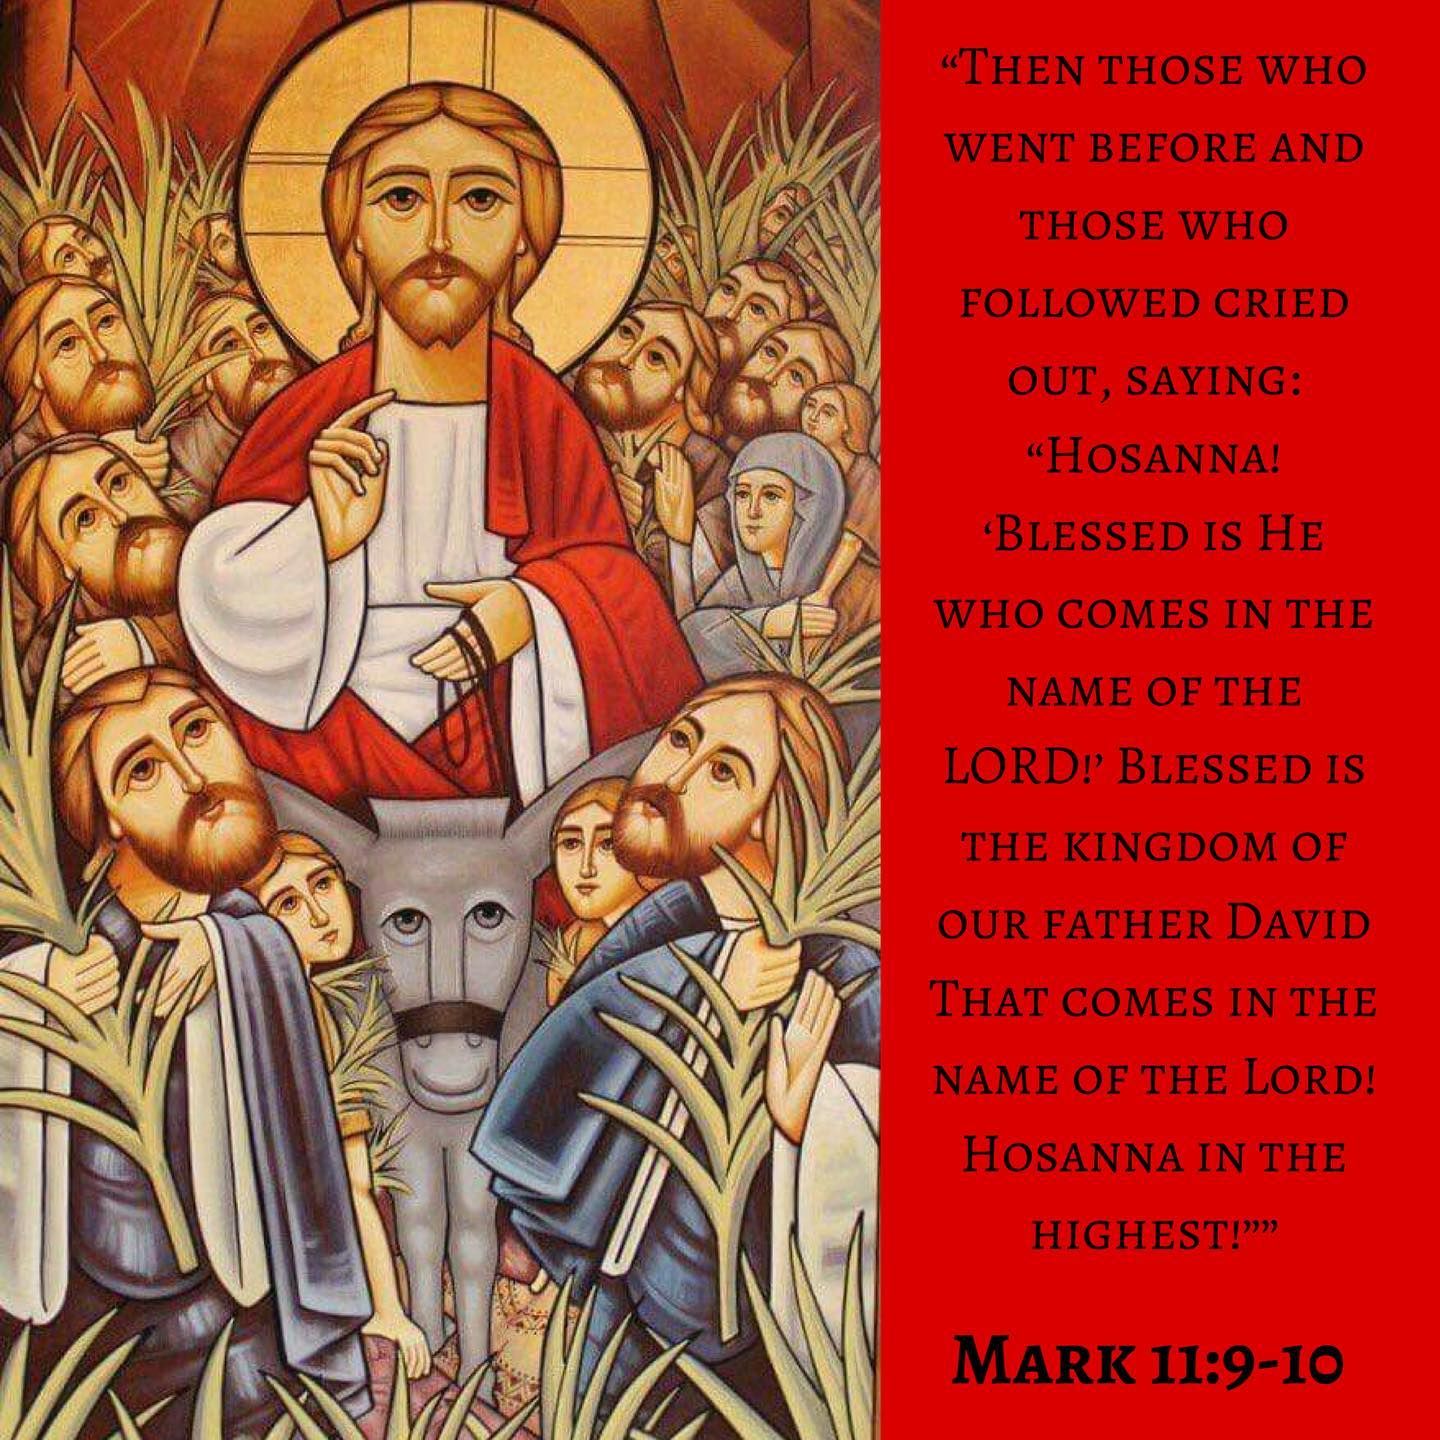 Palm Sunday “Palm Sunday is the Day where the Kingdom of the Earth with its Palms the Kingdom of Animals with the Donkey and the Kingdom of Men with their hymns and procession are all United in Christ welcoming him into Jerusalem” – H.H. Pope Tawadros II #coptic #orthodox #palmsunday #blessed #hosanna #holypashca